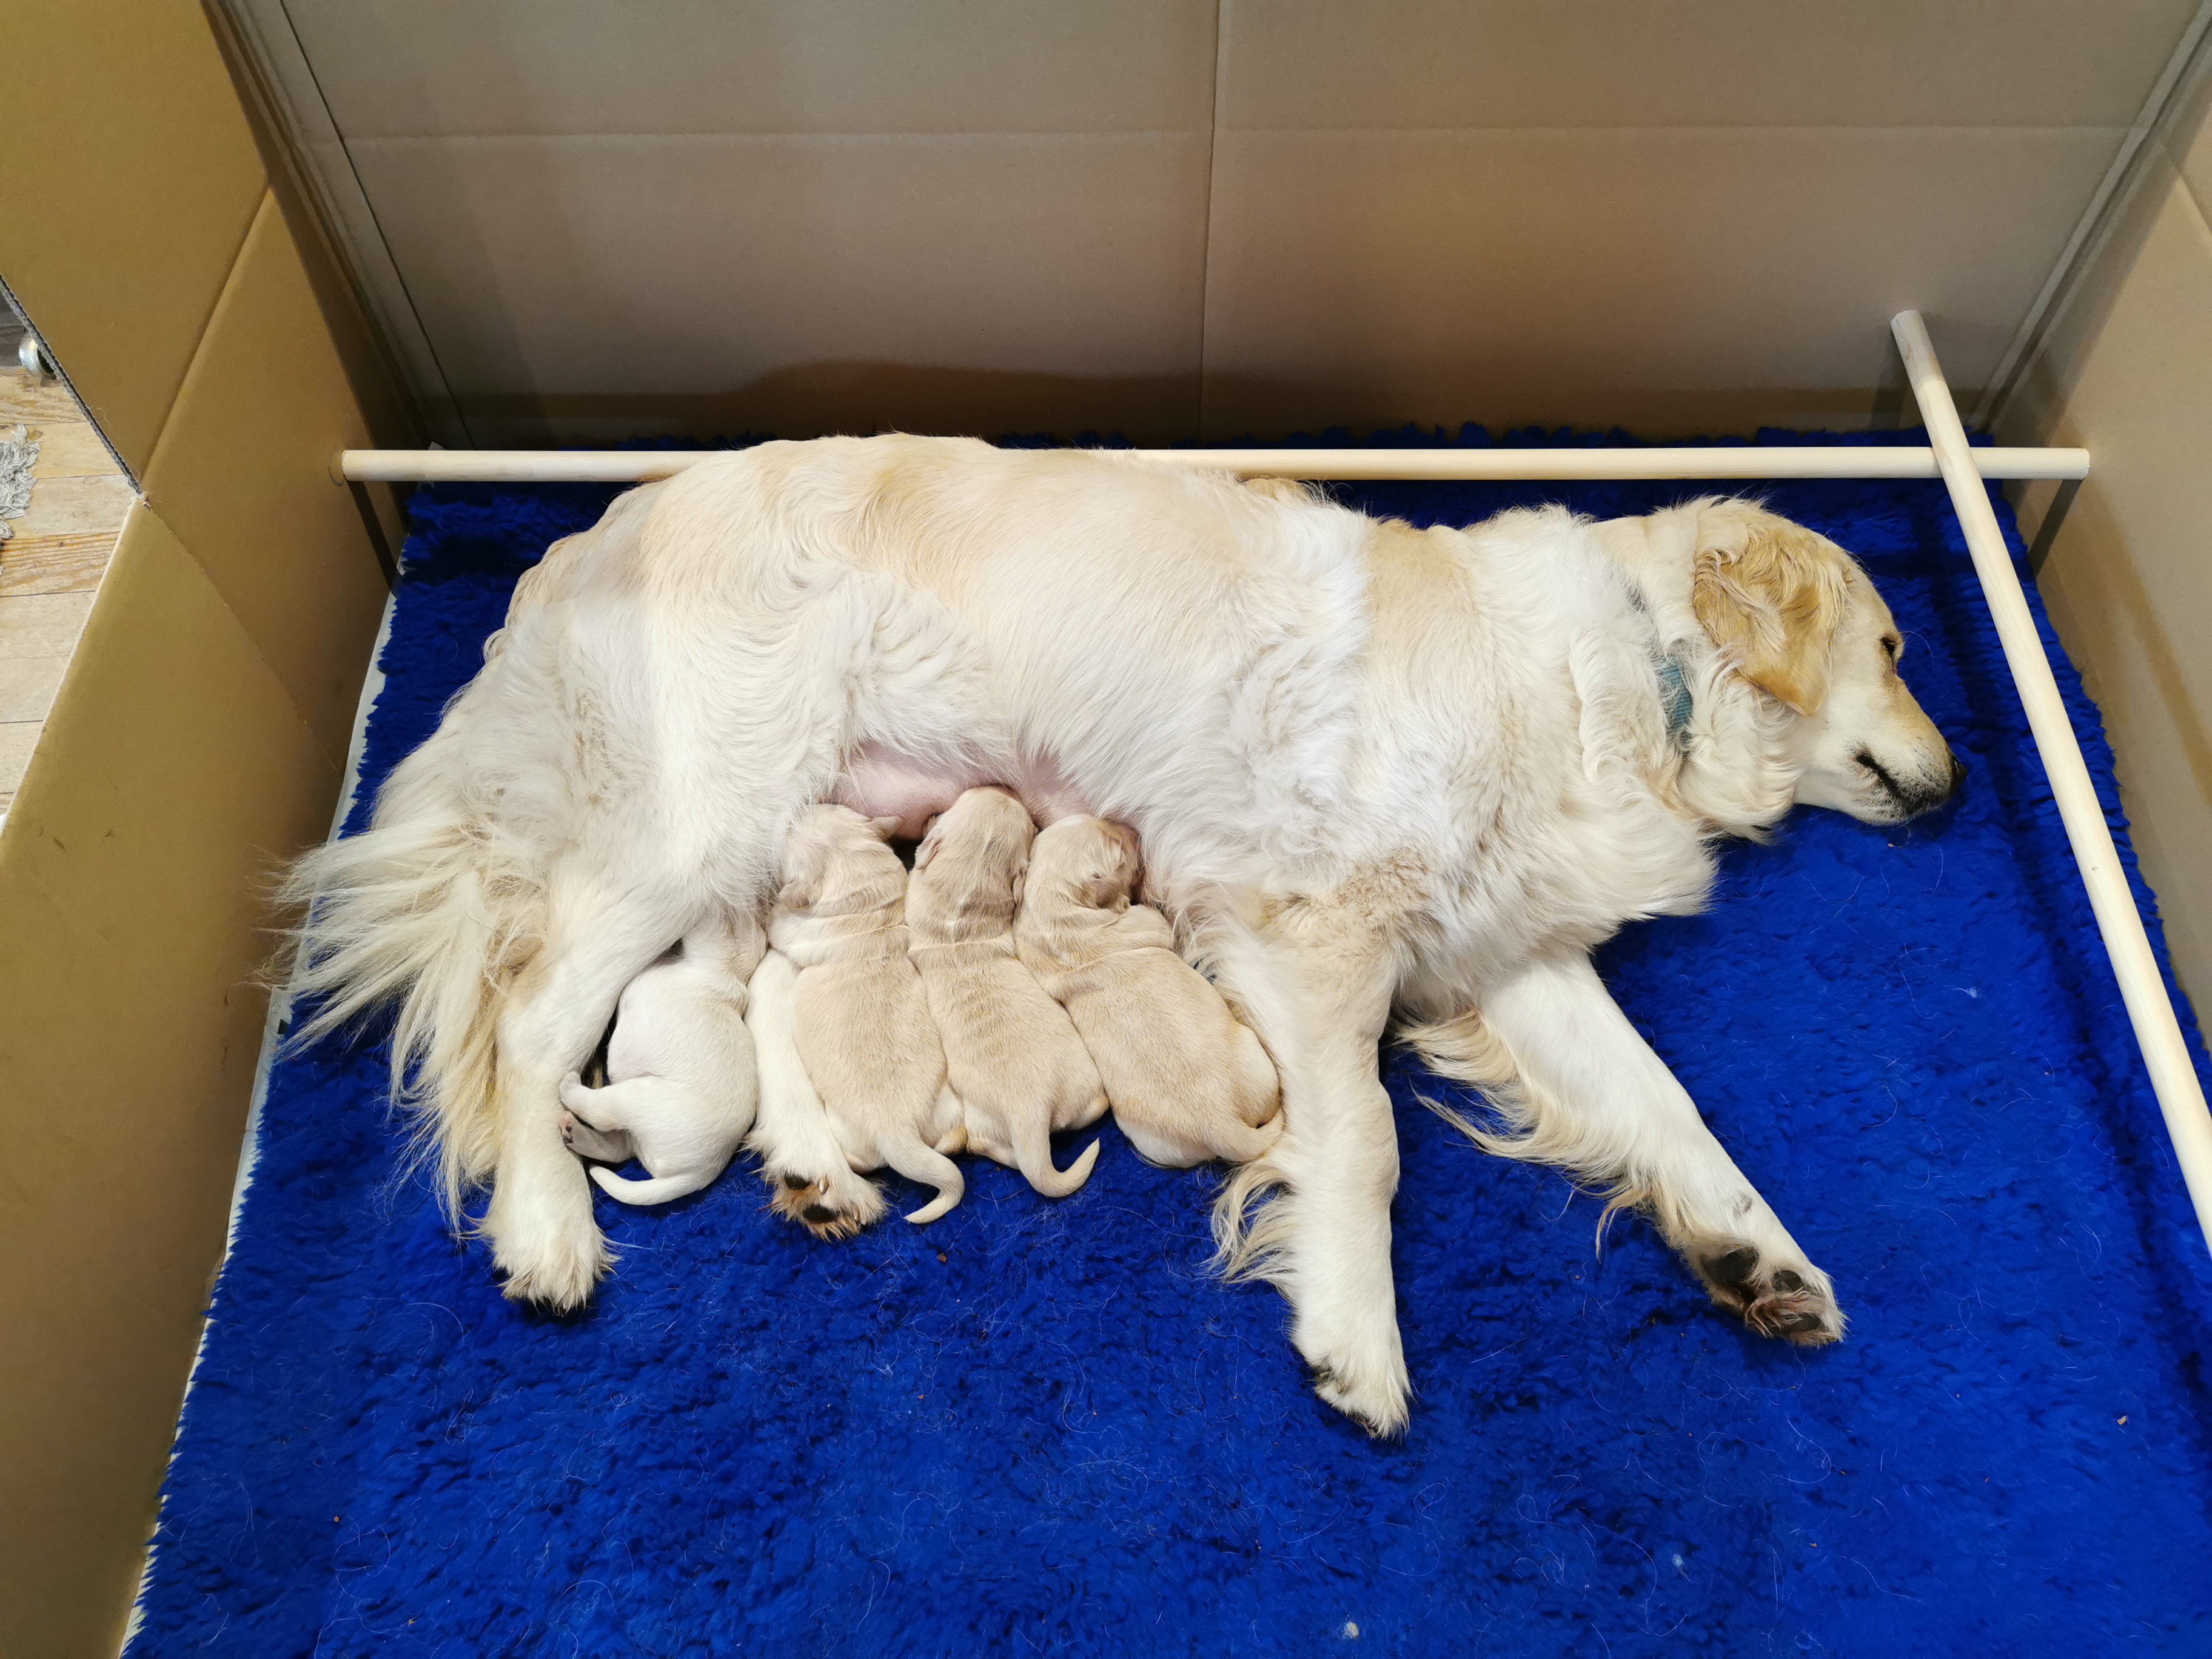 Pandy and her 5 day old pups